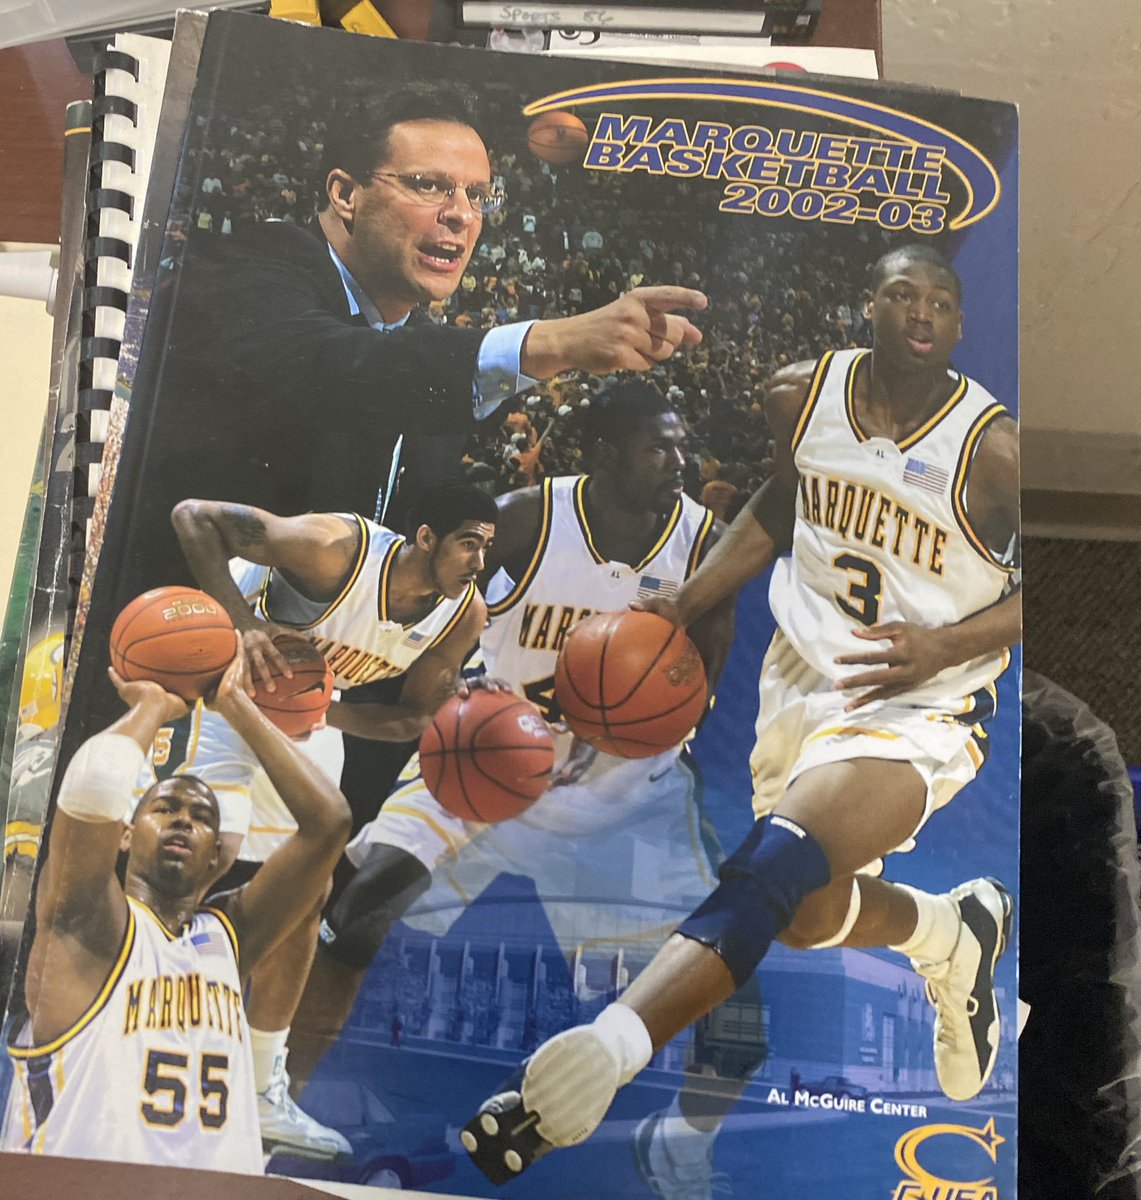 Ok. Got to break this old media guide out for some Marquette rally time… @brutus_87to98 @muathletics @MarquetteMBB @mubbnation @GoldenEagles247 @TappingTheKeg @BE_GoldenEagle @nathanmarzion @DwyaneWade @DienerTravis